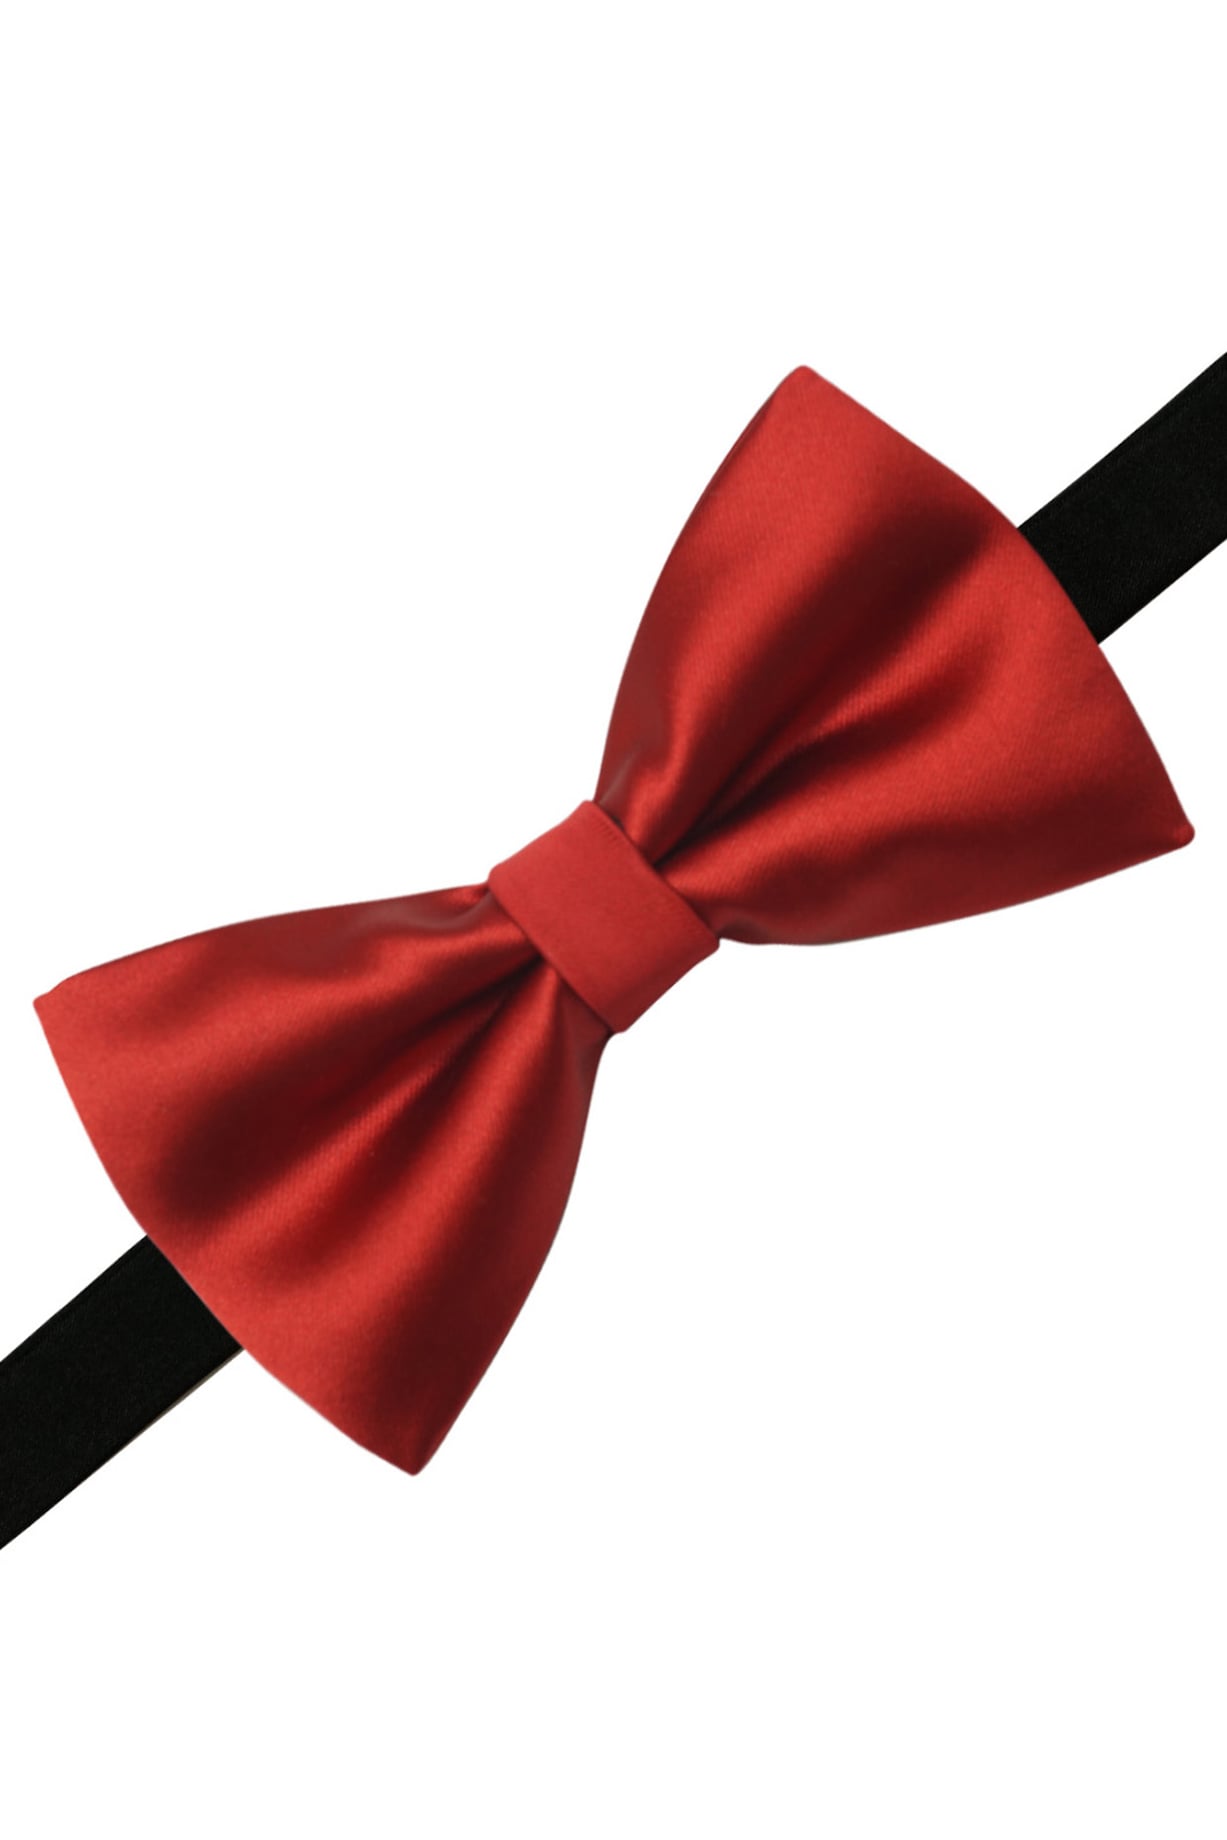 Red Microfiber Bow Tie by THE TIE HUB